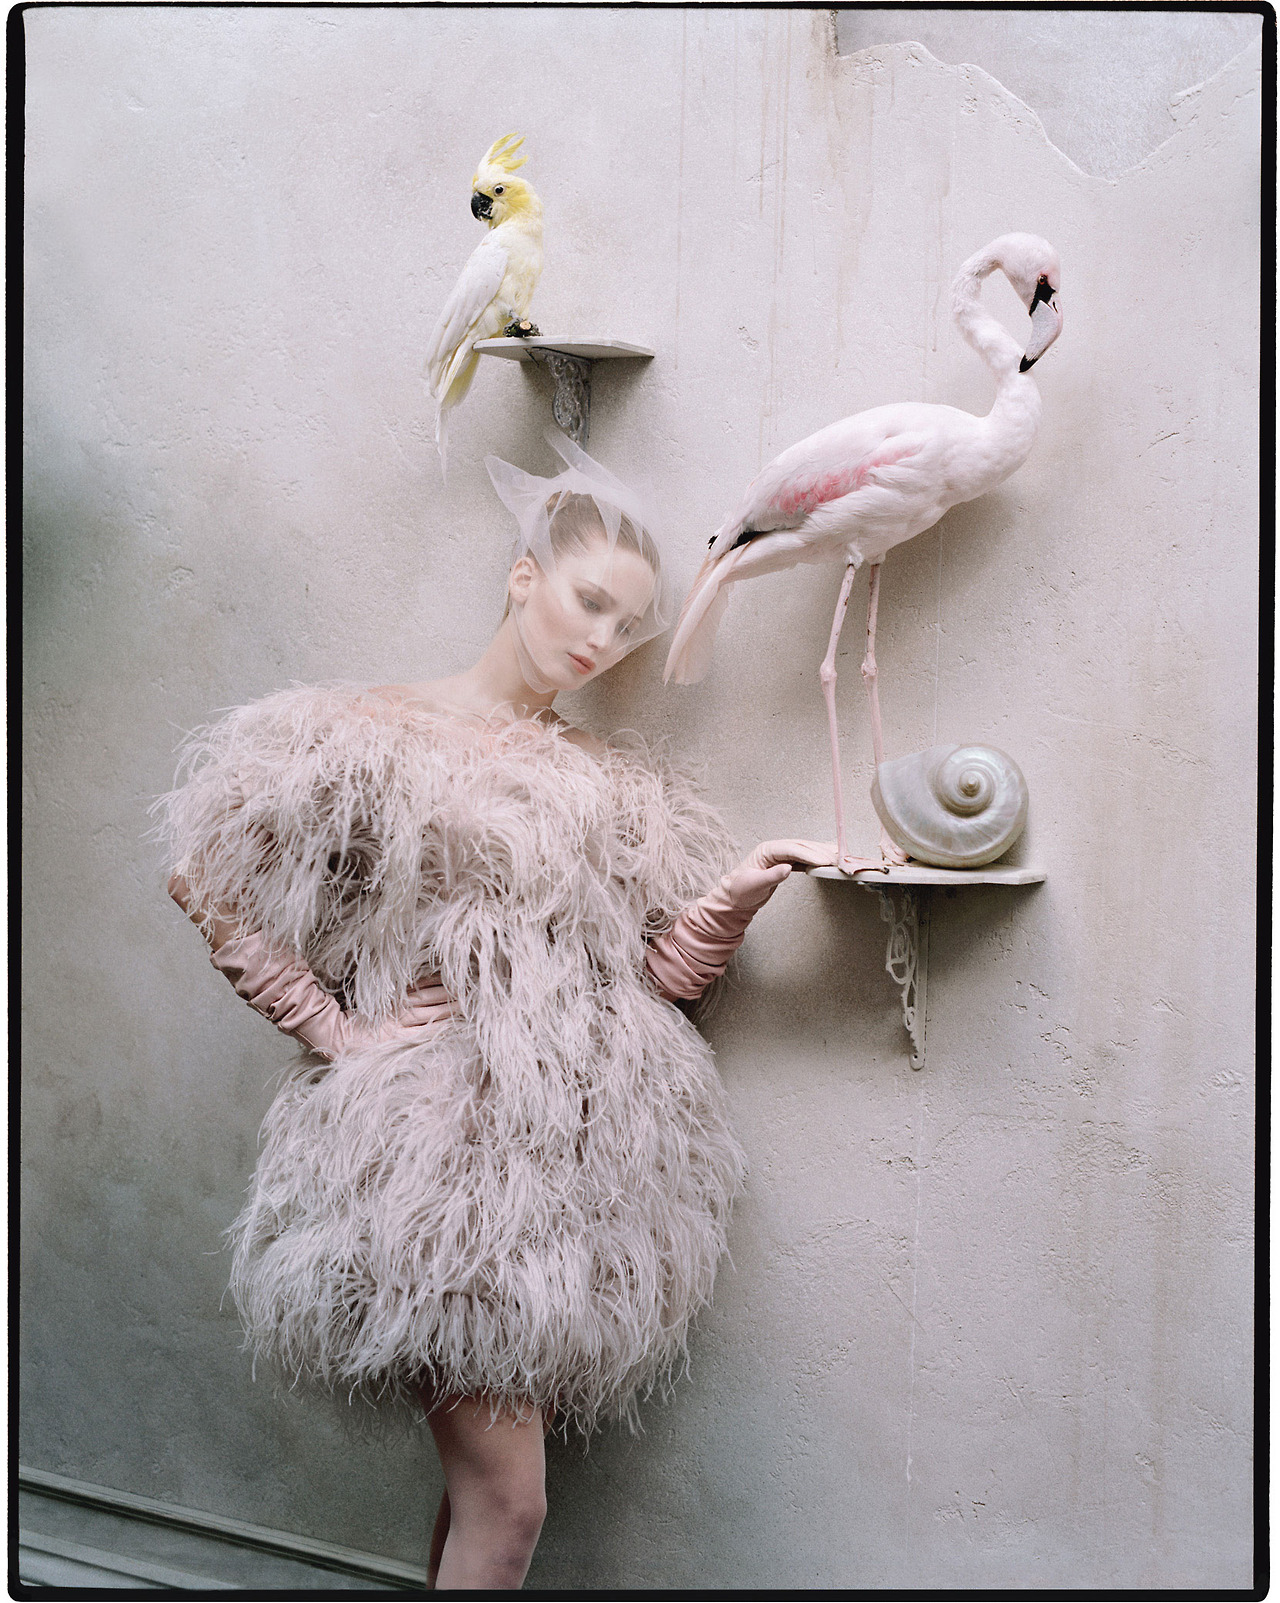 Birds of a feather Photograph by Tim Walker; styled by Jacob K; W magazine October 2012.